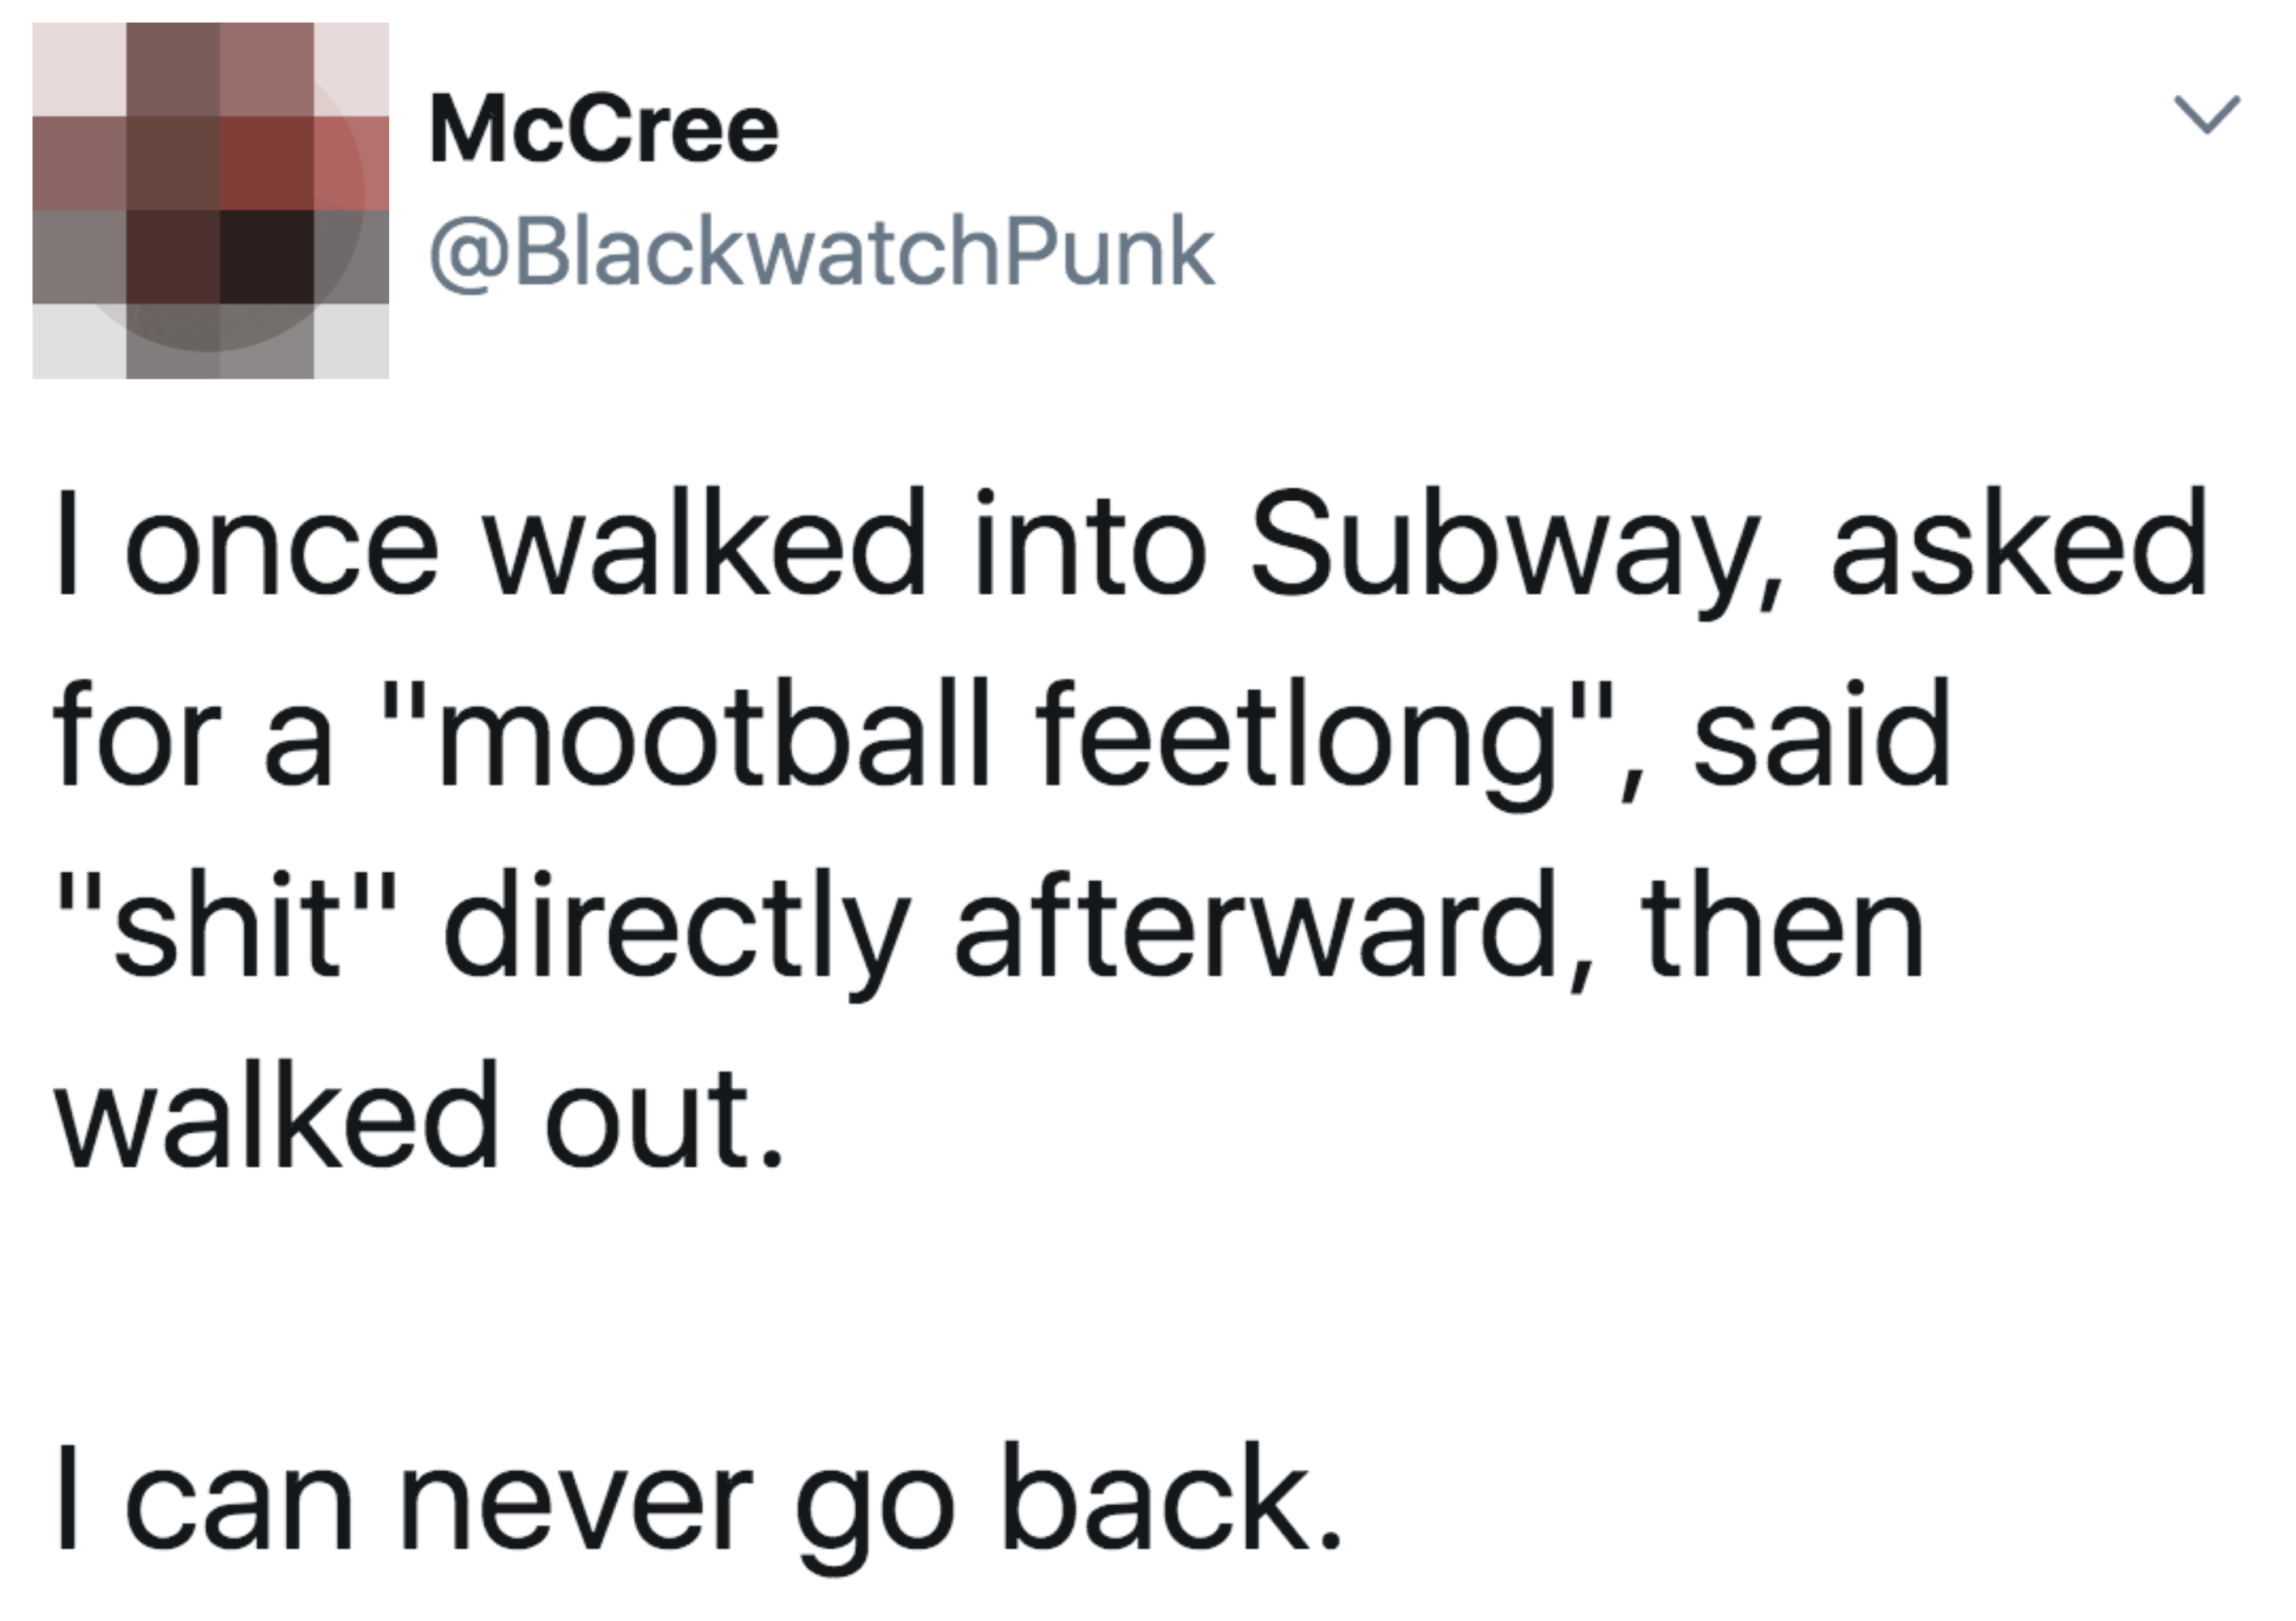 Tweet: &quot;i once walked into Subway, asked for a &#x27;mootball feetlong,&#x27; said shit, then walked out; I can never go back&quot;